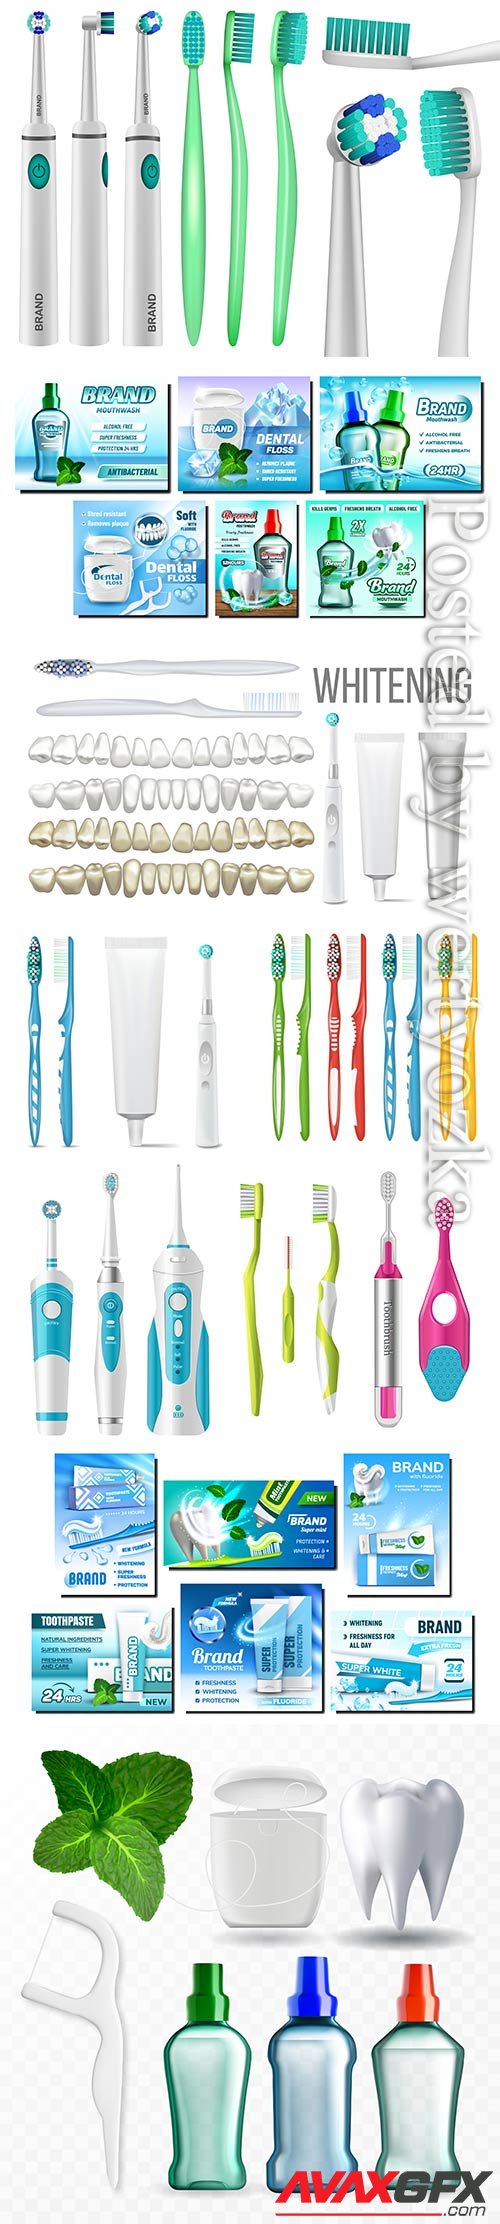 Dental floss promotional, toothpaste advertising vector set